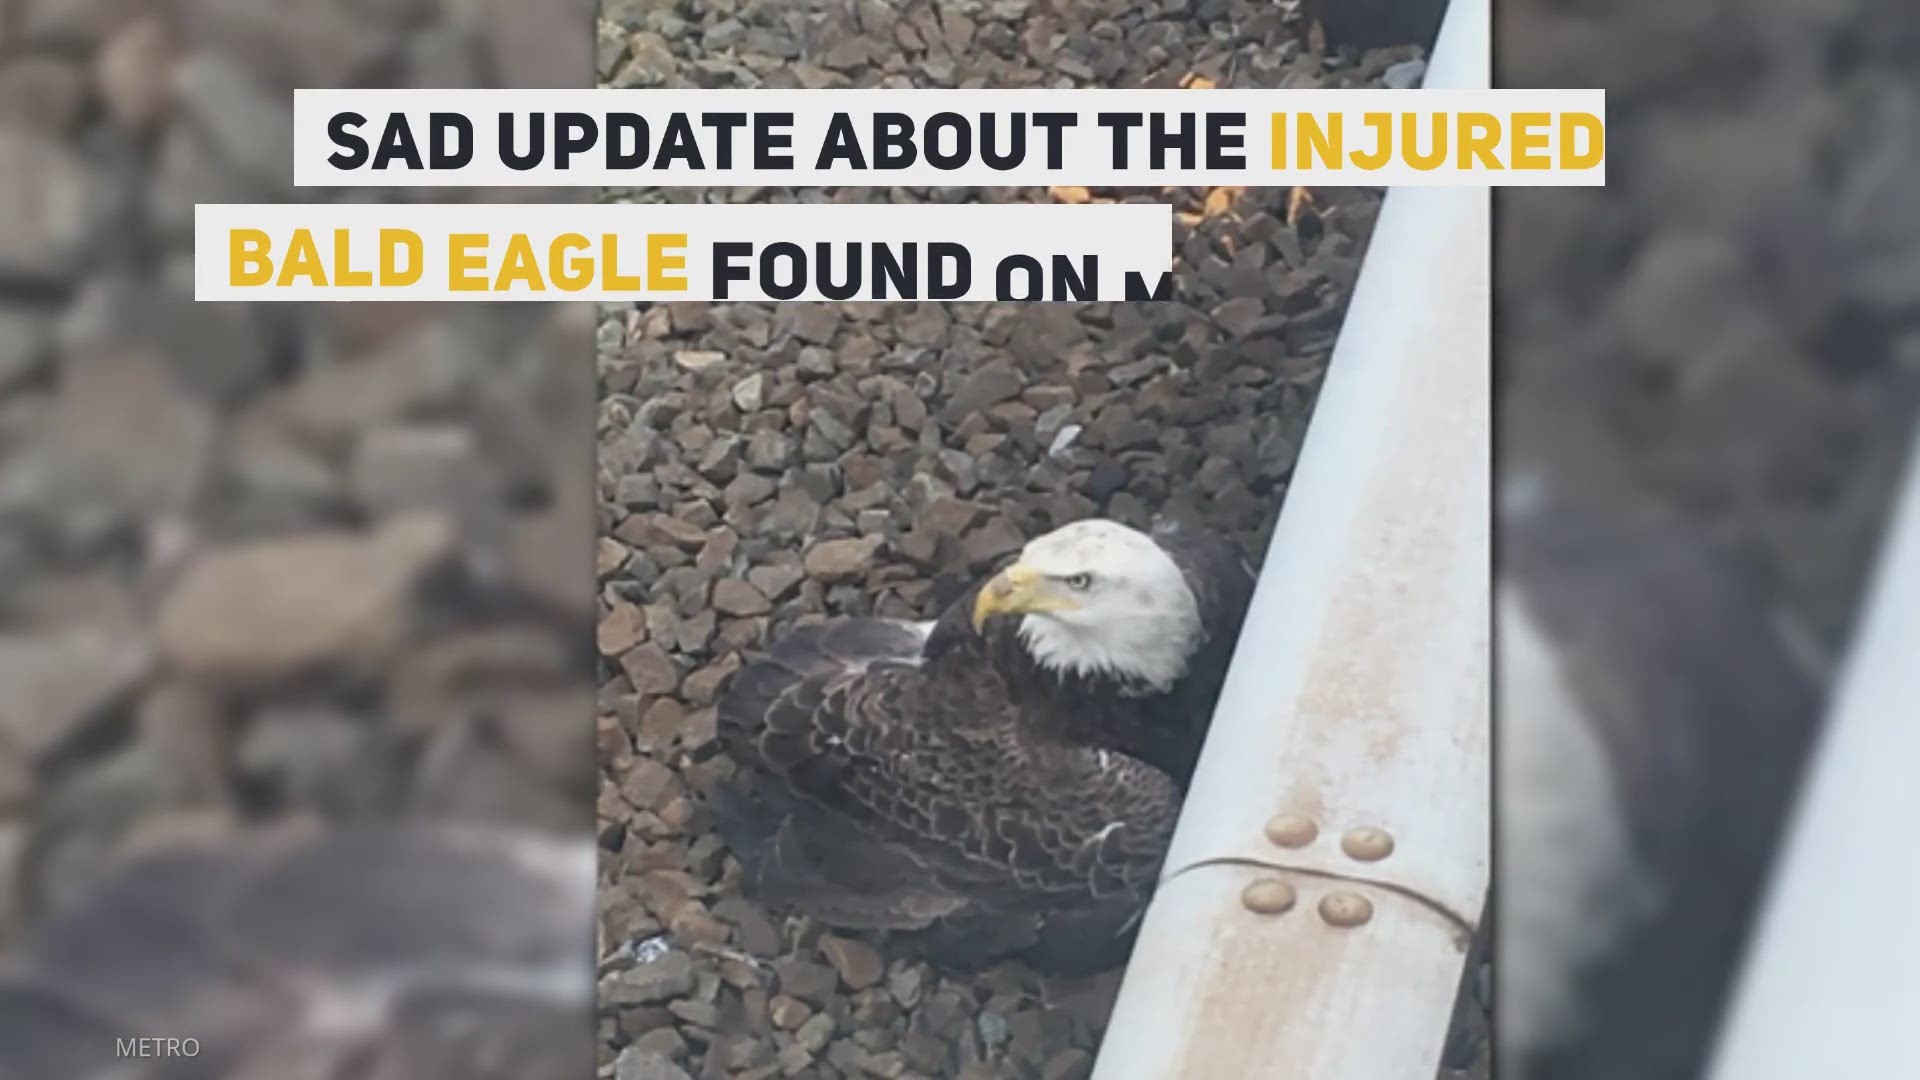 The bald eagle found on Metro tracks during rush hour had to be euthanized due to the severity of its injuries.